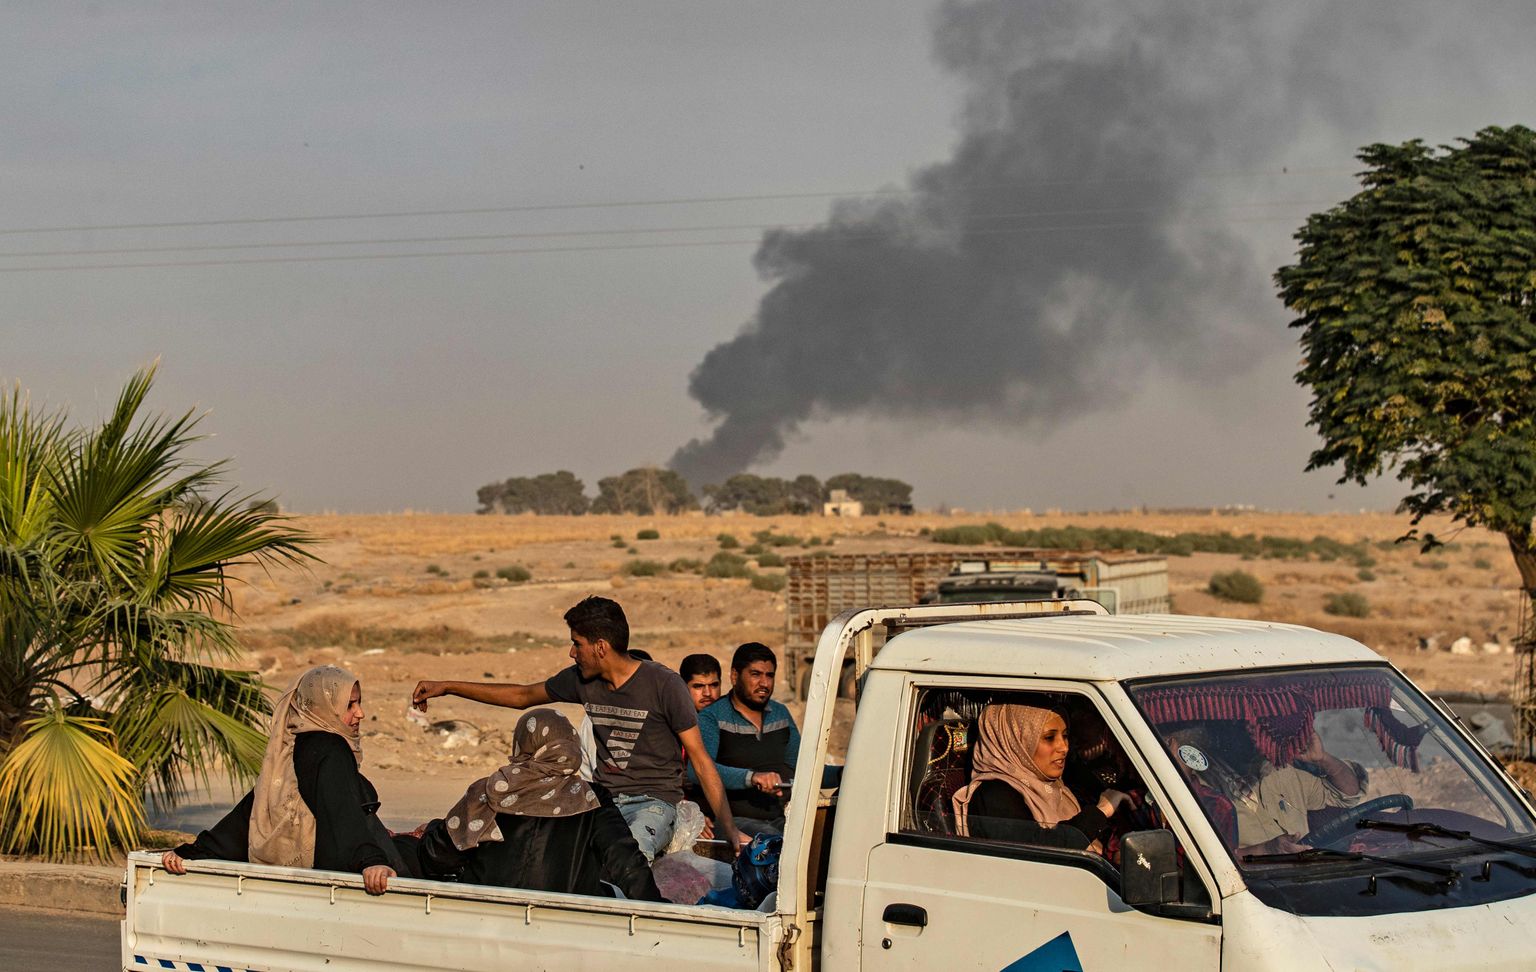 Civilians ride a pickup truck as smoke billows following Turkish bombardment in the northeastern town of Ras al-Ain in Syria's Hasakeh province along the Turkish border on October 9, 2019. - Turkey launched an assault on Kurdish forces in northern Syria with air strikes and explosions reported along the border. President Recep Tayyip Erdogan announced the start of the attack on Twitter, labelling it "Operation Peace Spring". (Photo by Delil SOULEIMAN / AFP)